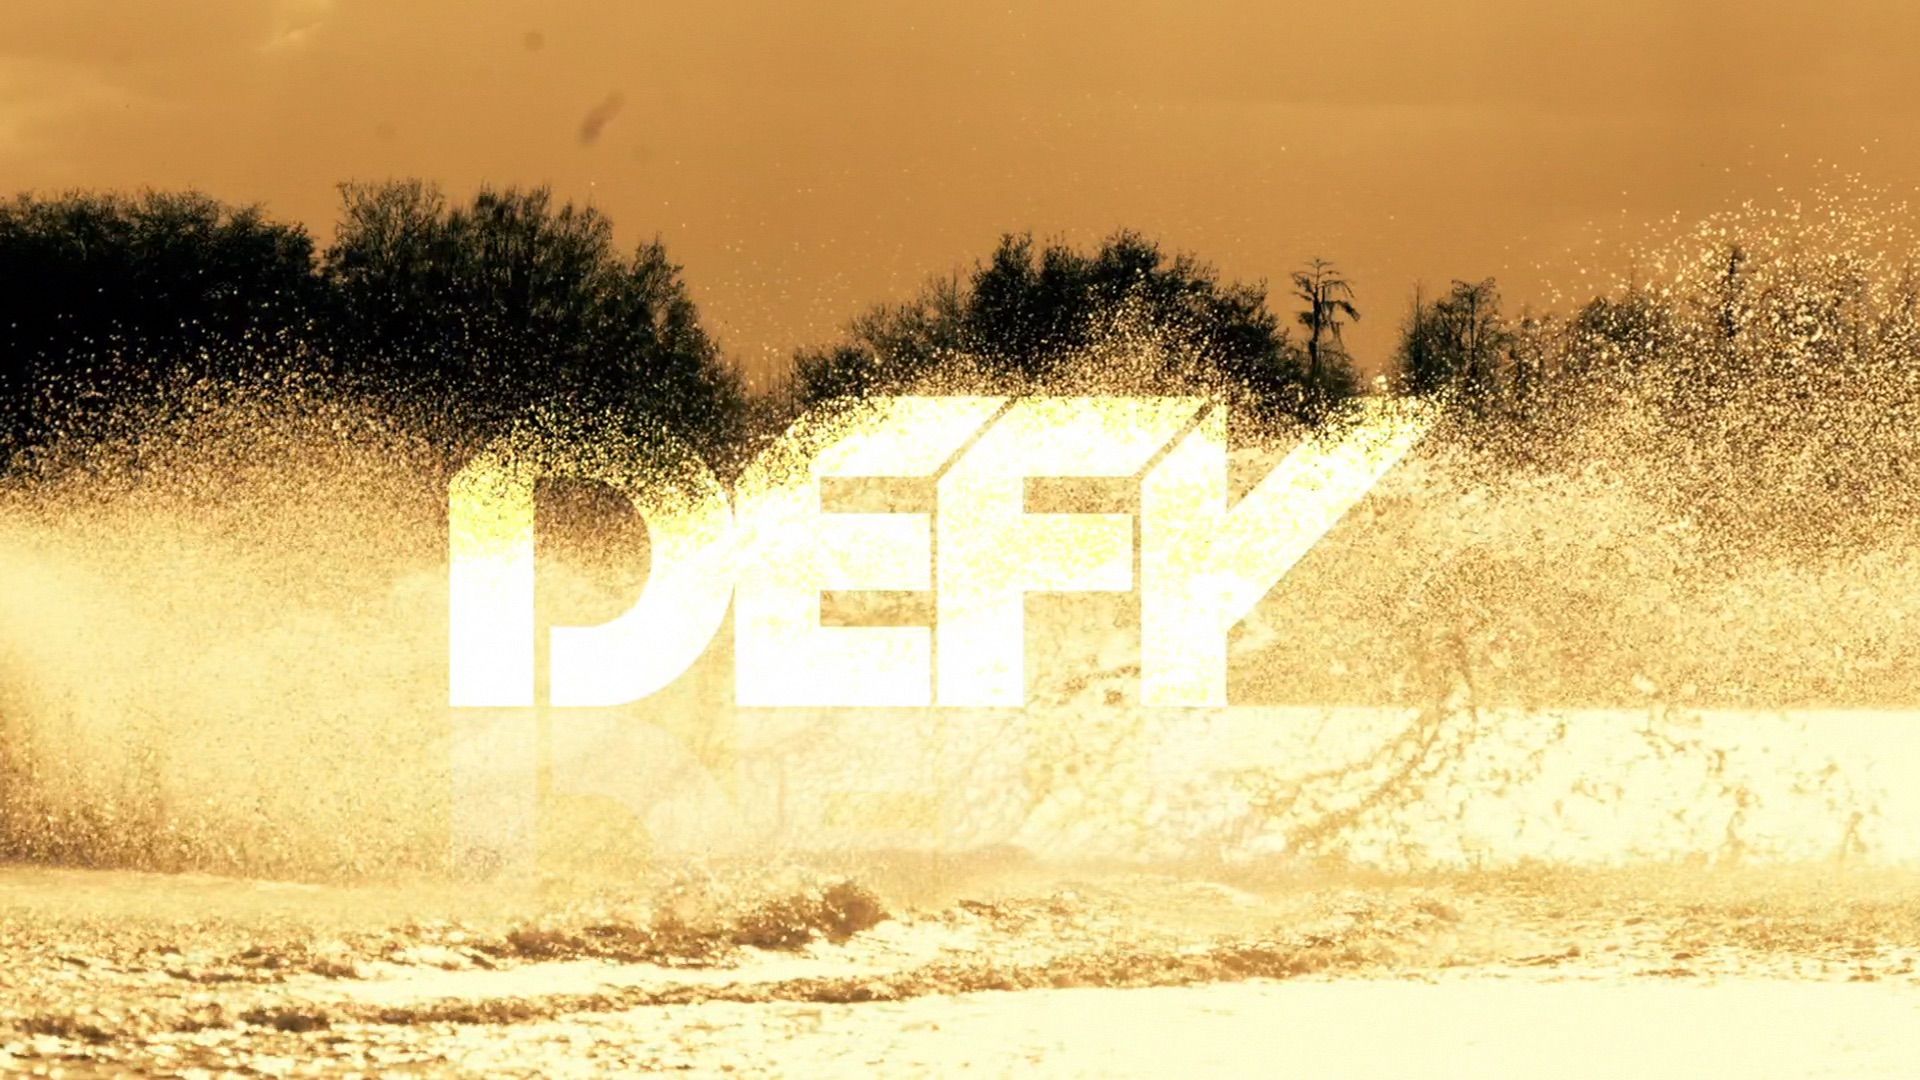 Defy: The Danny Harf Project Backdrop